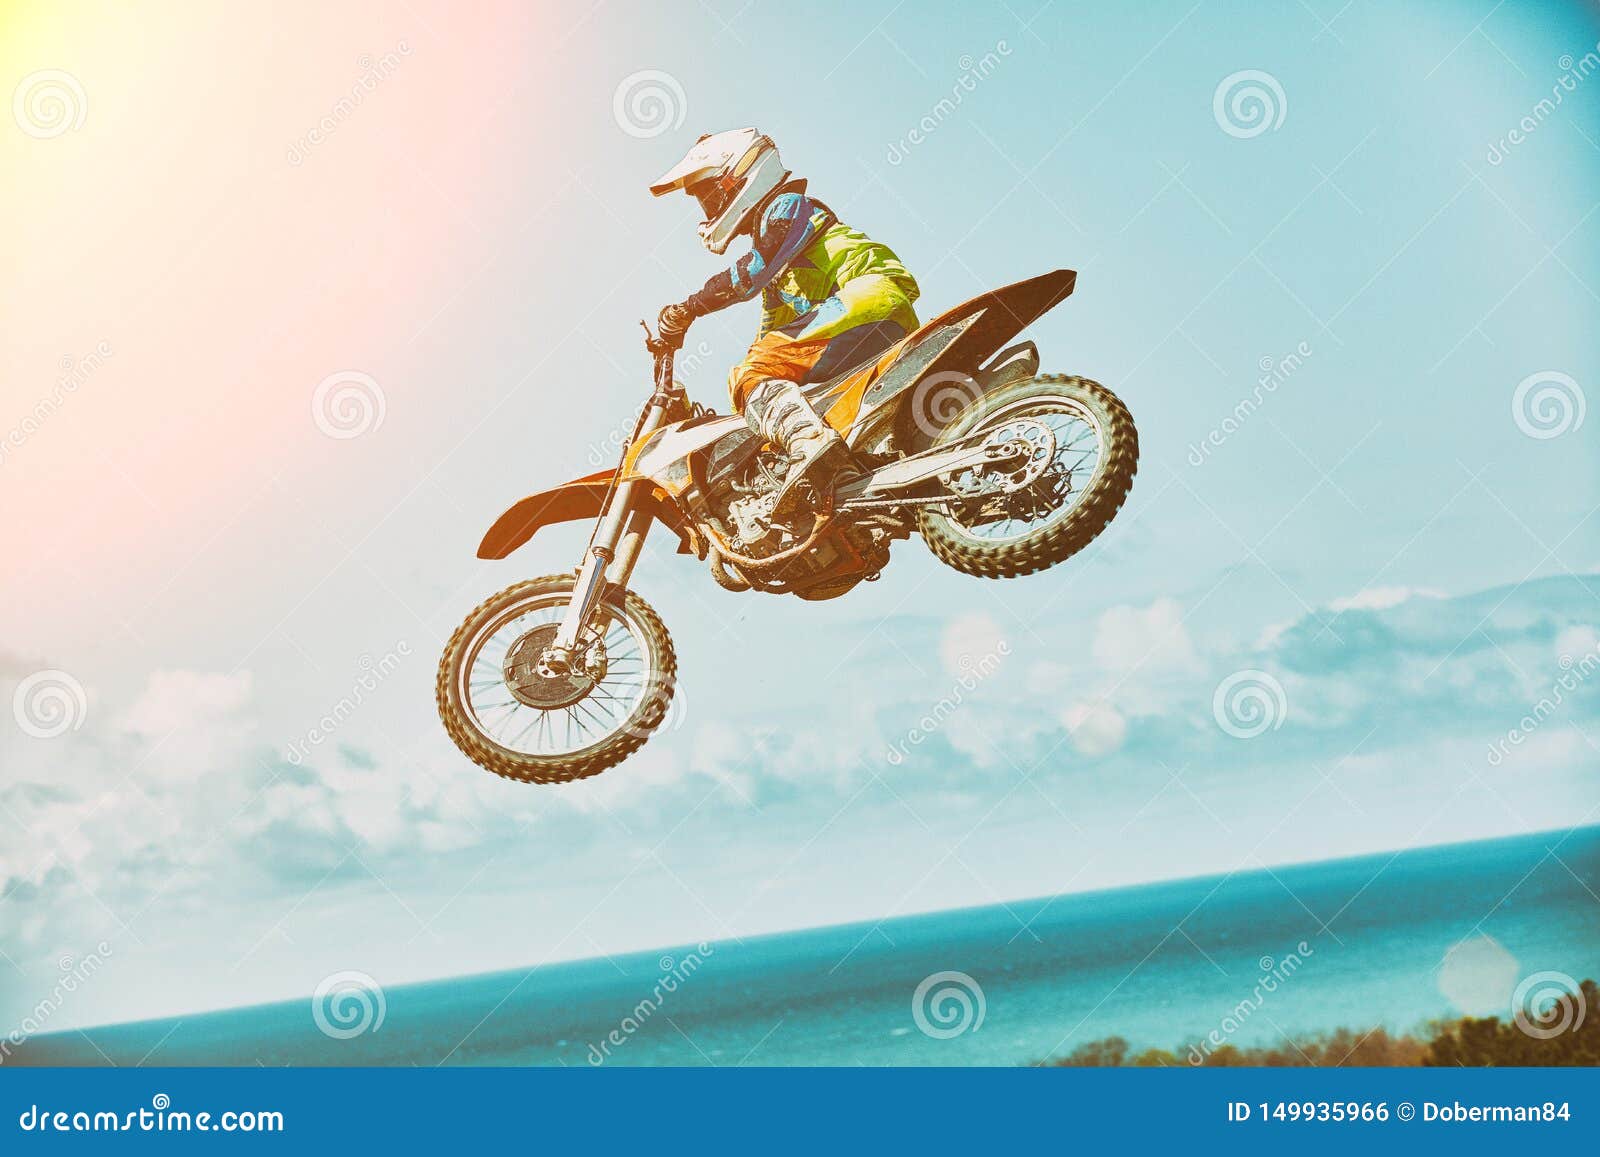 extreme sports, motorcycle jumping. motorcyclist makes an extreme jump against the sky. extreme sports, motorcycle